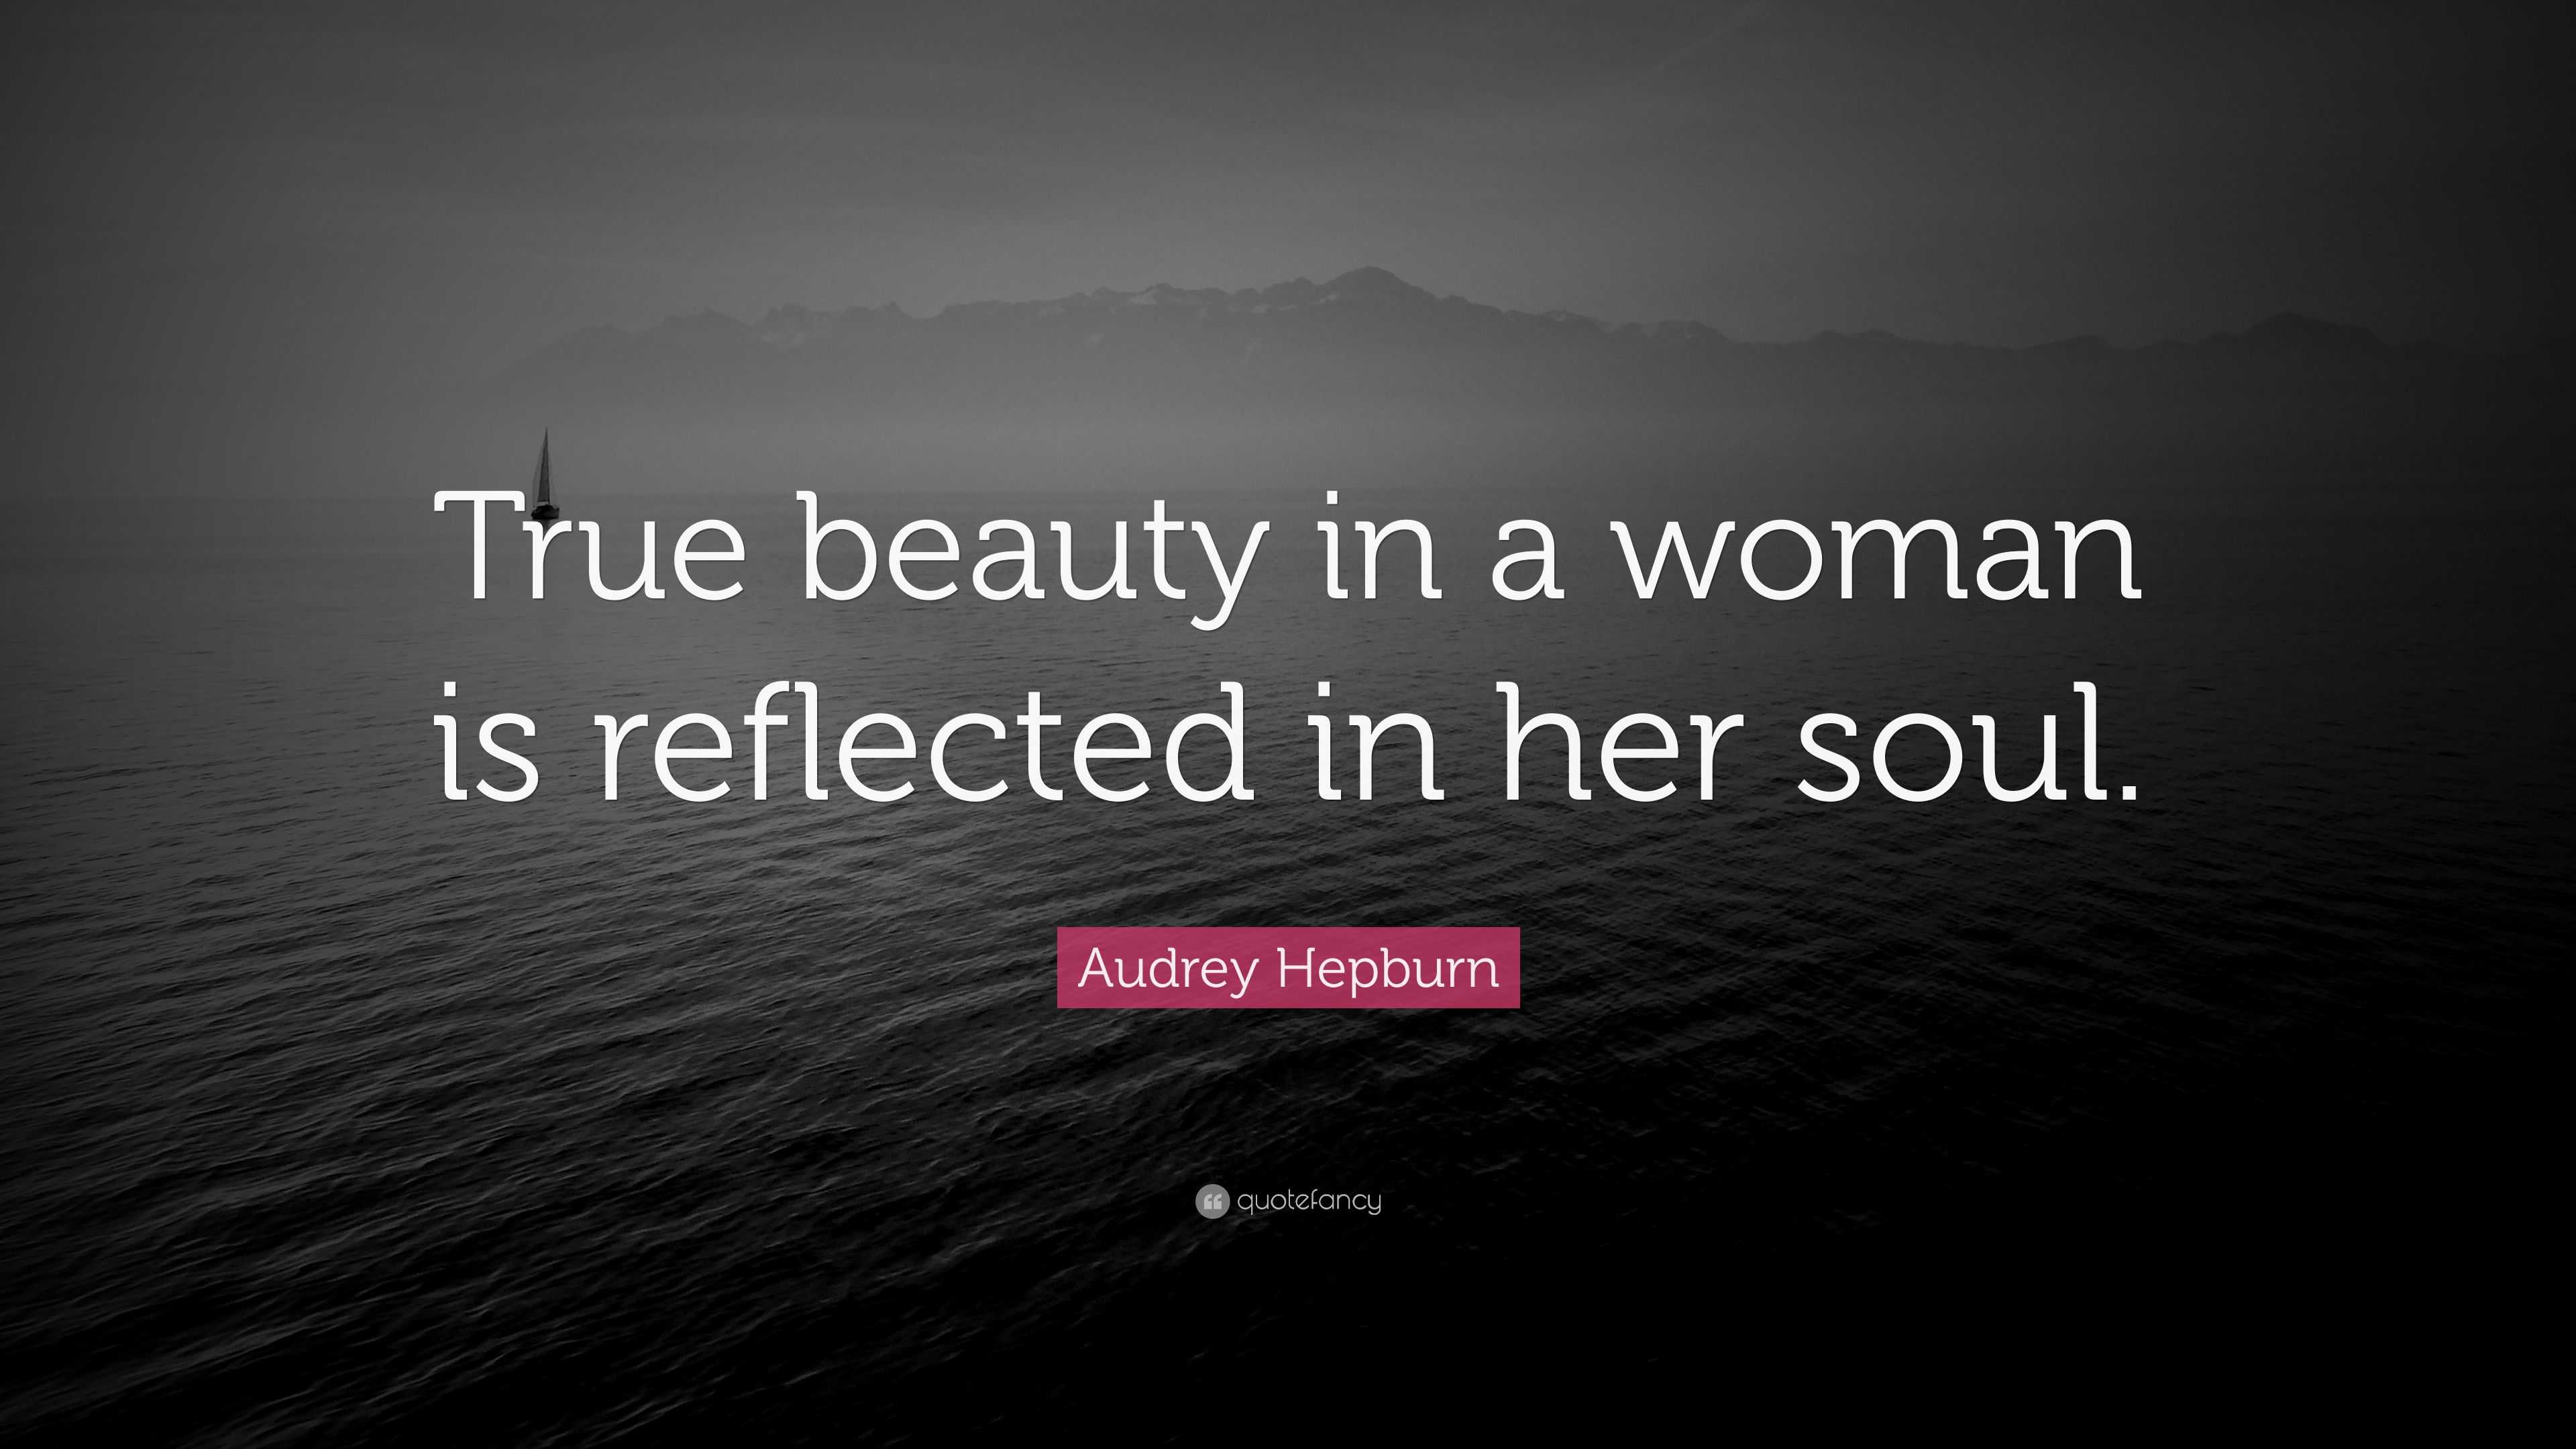 Audrey Hepburn Quote: “True beauty in a woman is reflected in her soul.”